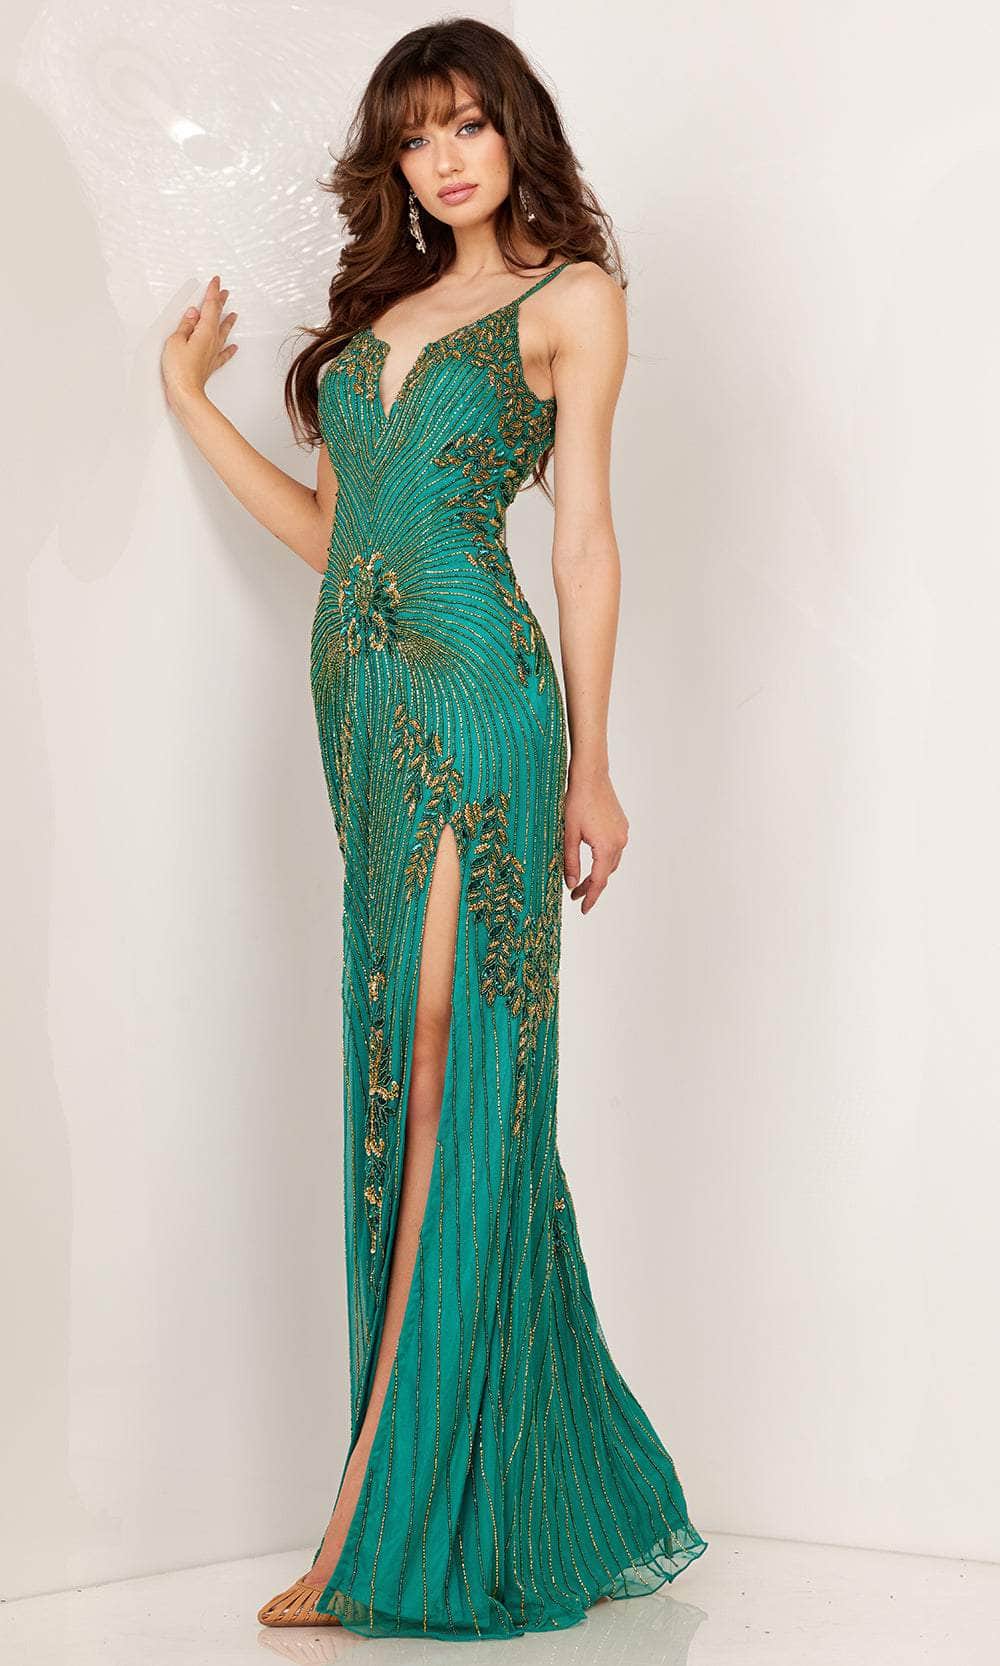 Image of Aleta Couture 1275 - Beaded Fitted Sleeveless Prom Dress